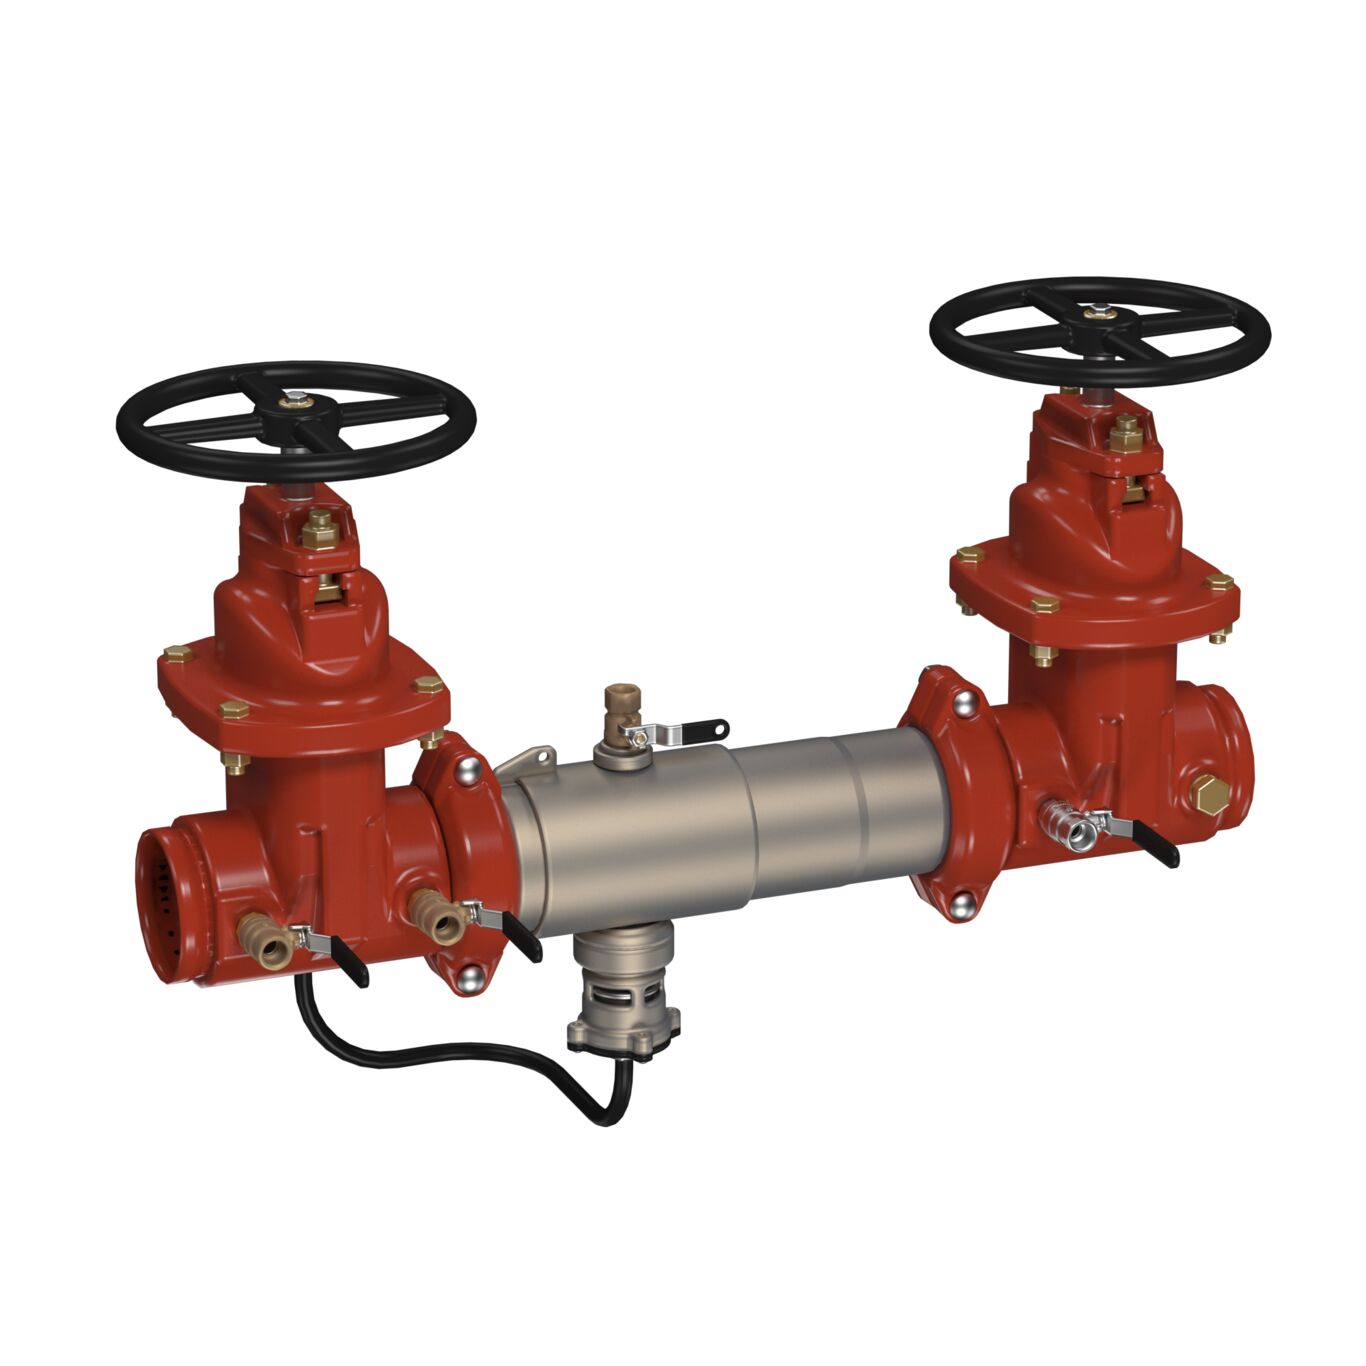 Stainless Steel Reduced Pressure Zone Assembly Backflow Preventer, NRS Shutoff Valves, Grooved Inlet x Grooved Outlet